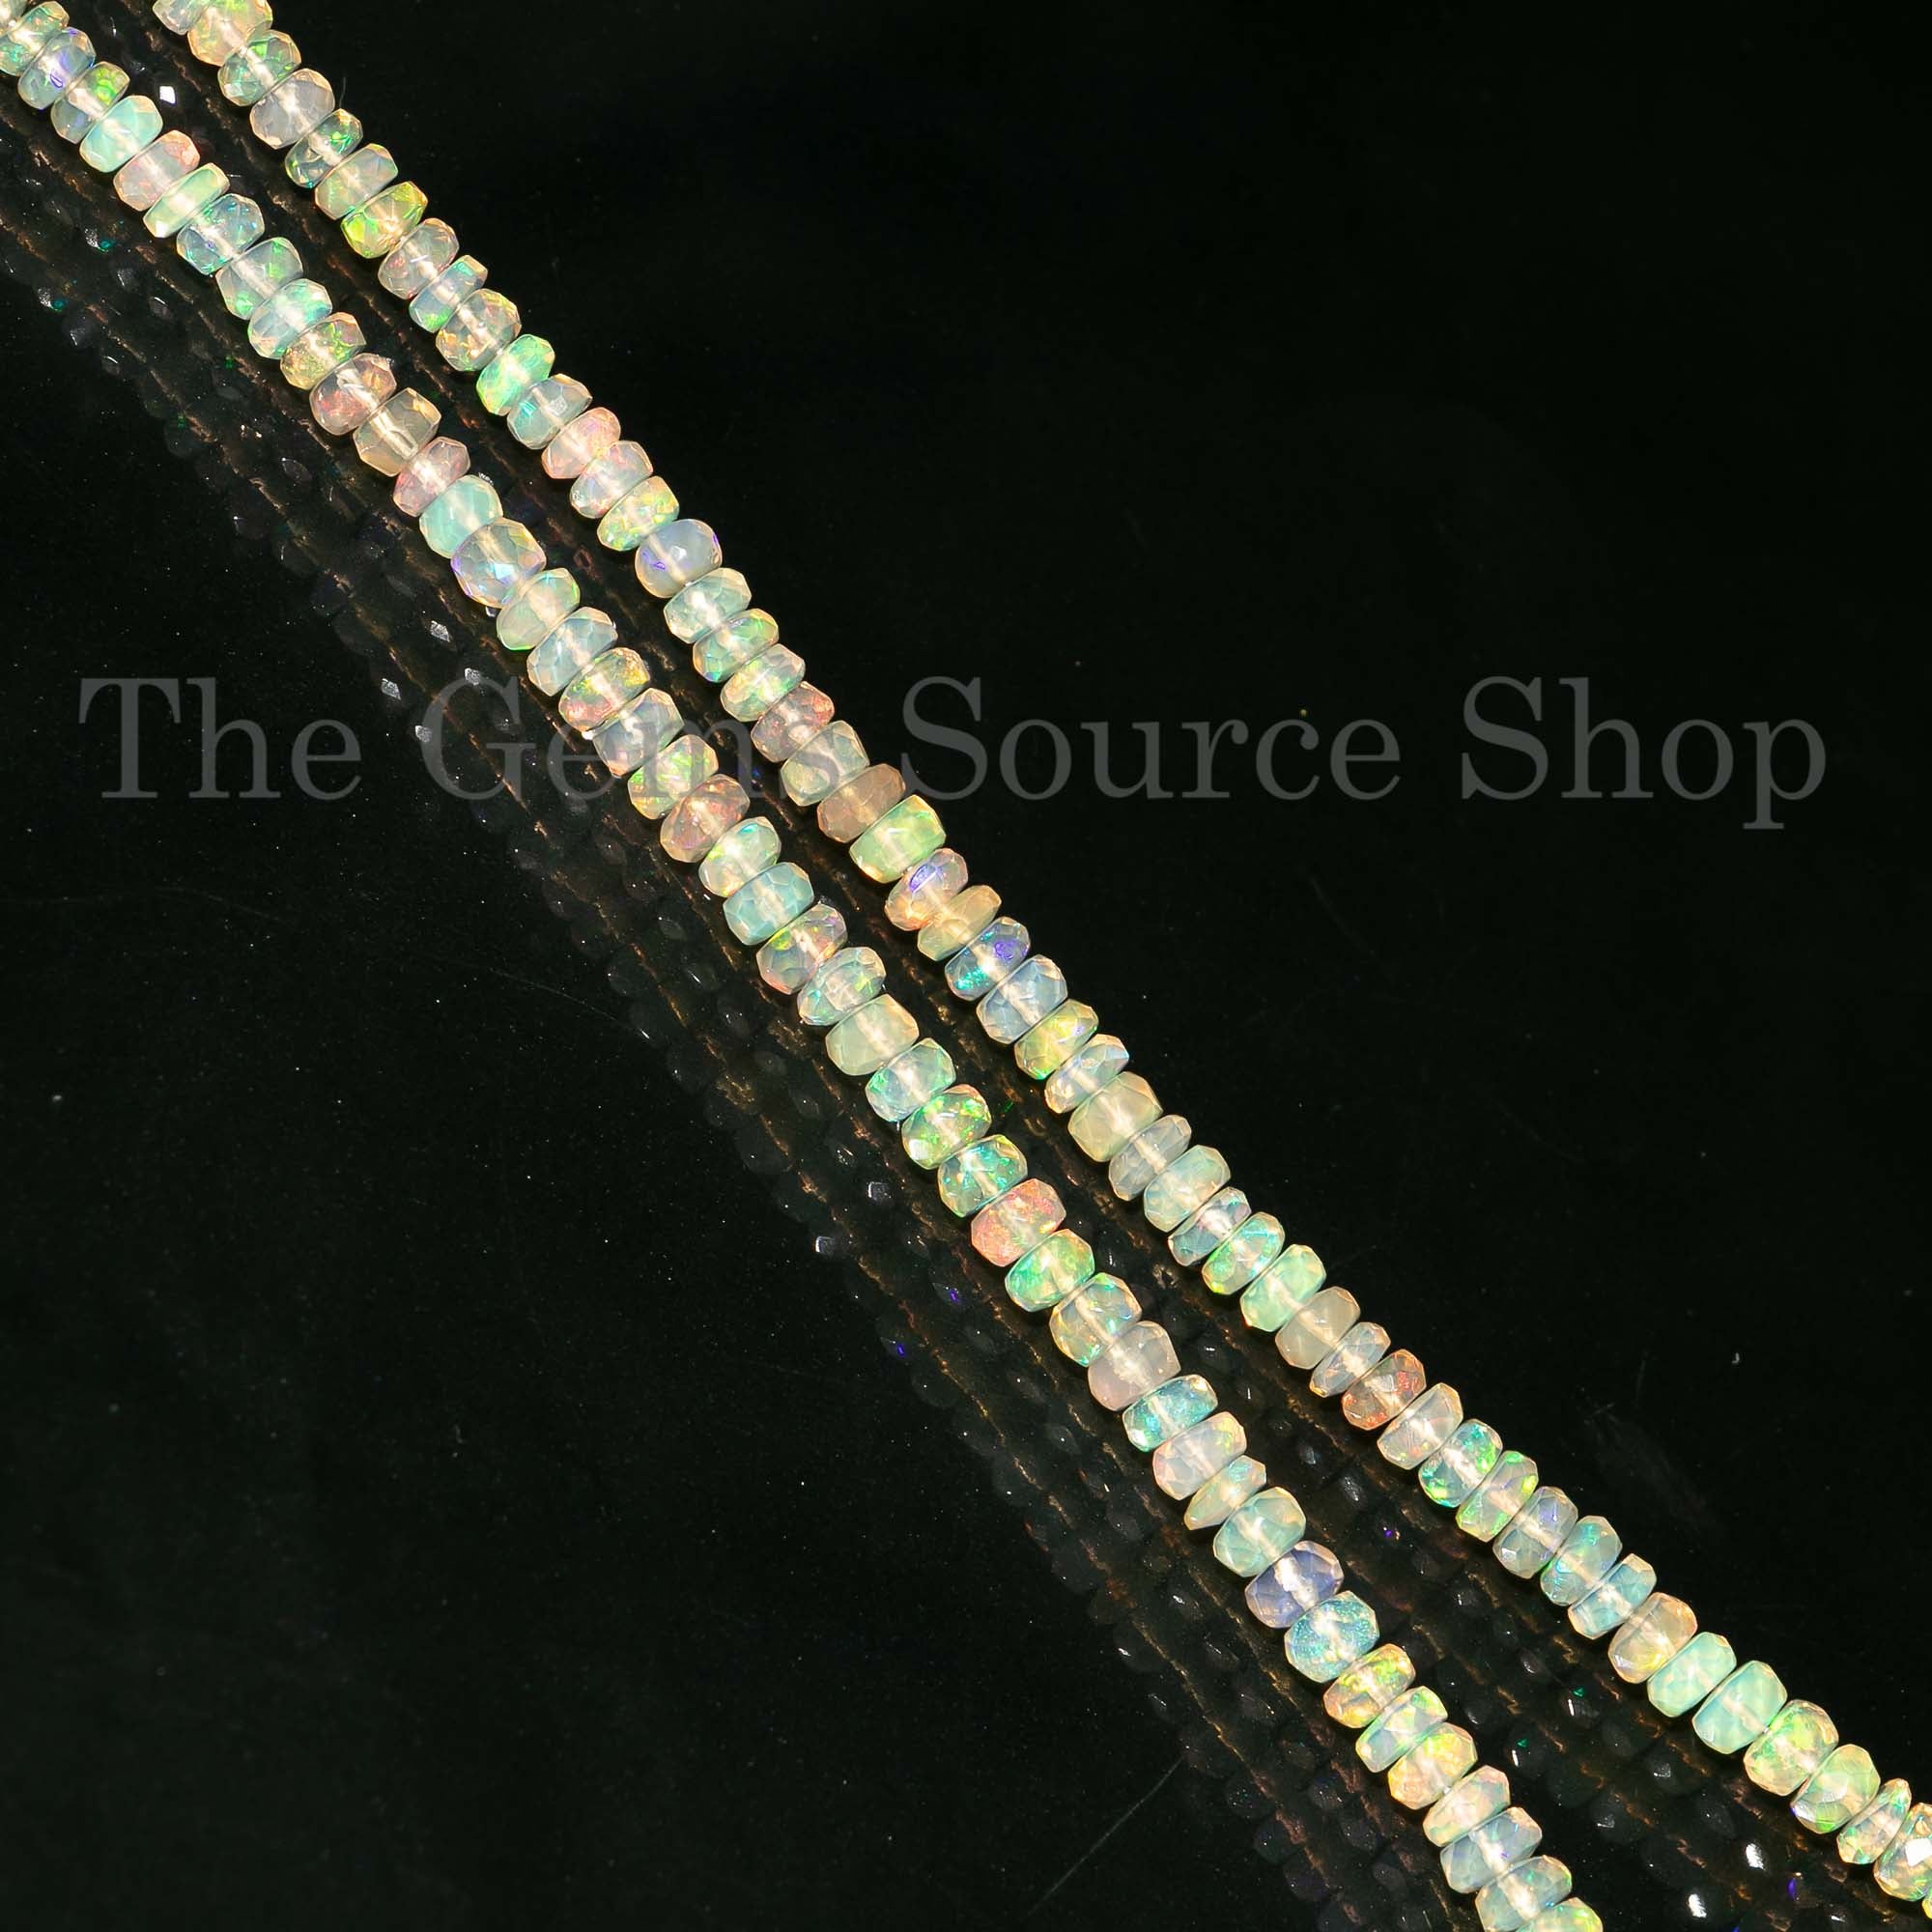 Ethiopian Opal Necklace, 3.5-5mm Opal Faceted Rondelle Rondelle, Opal Faceted Beads, Opal Beads, Ethiopian Opal Necklace, Opal Jewelry